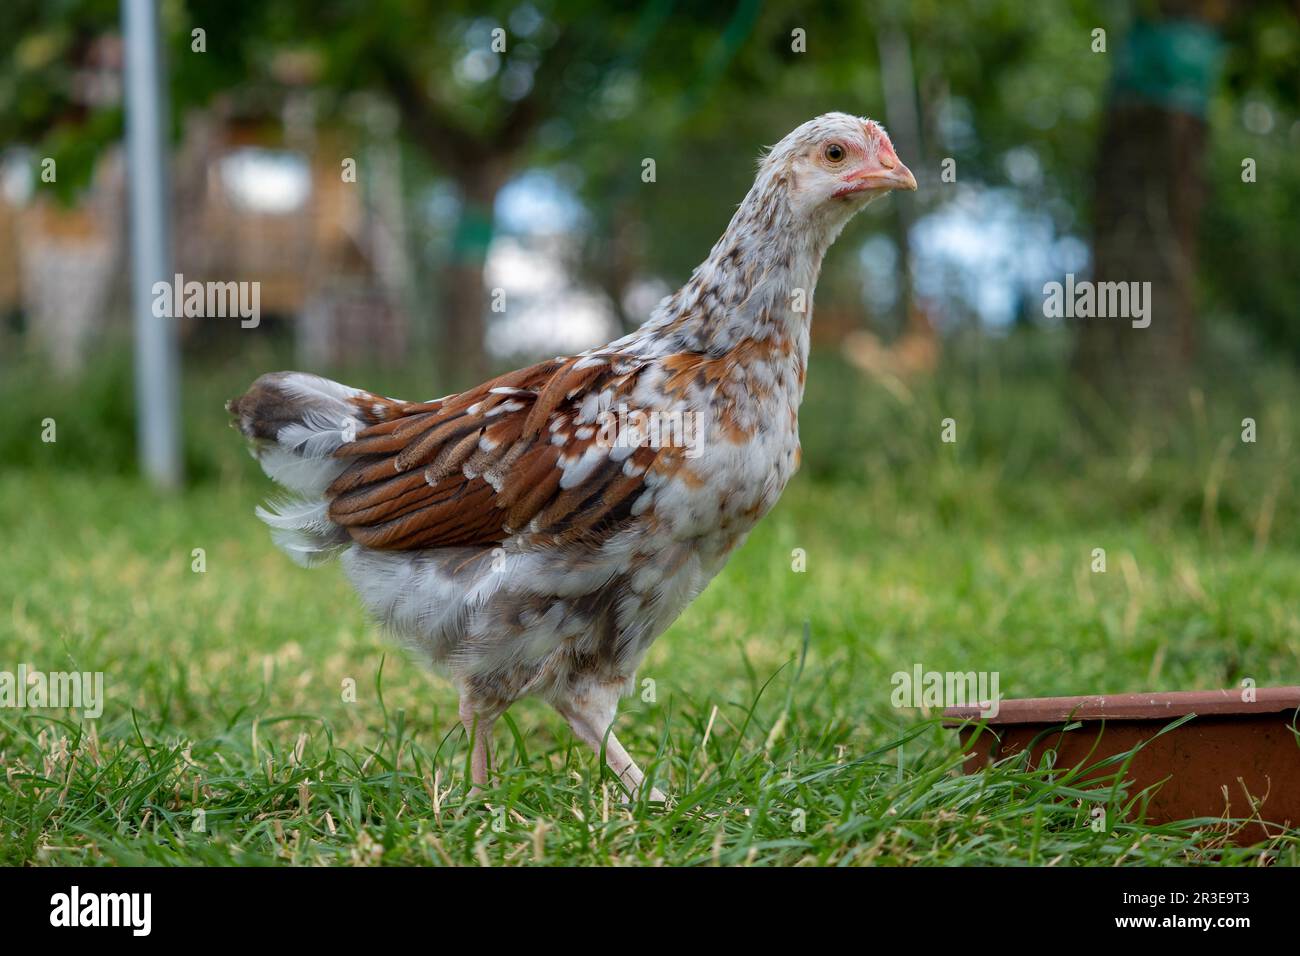 Adolescent chickens in the meadow Stock Photo